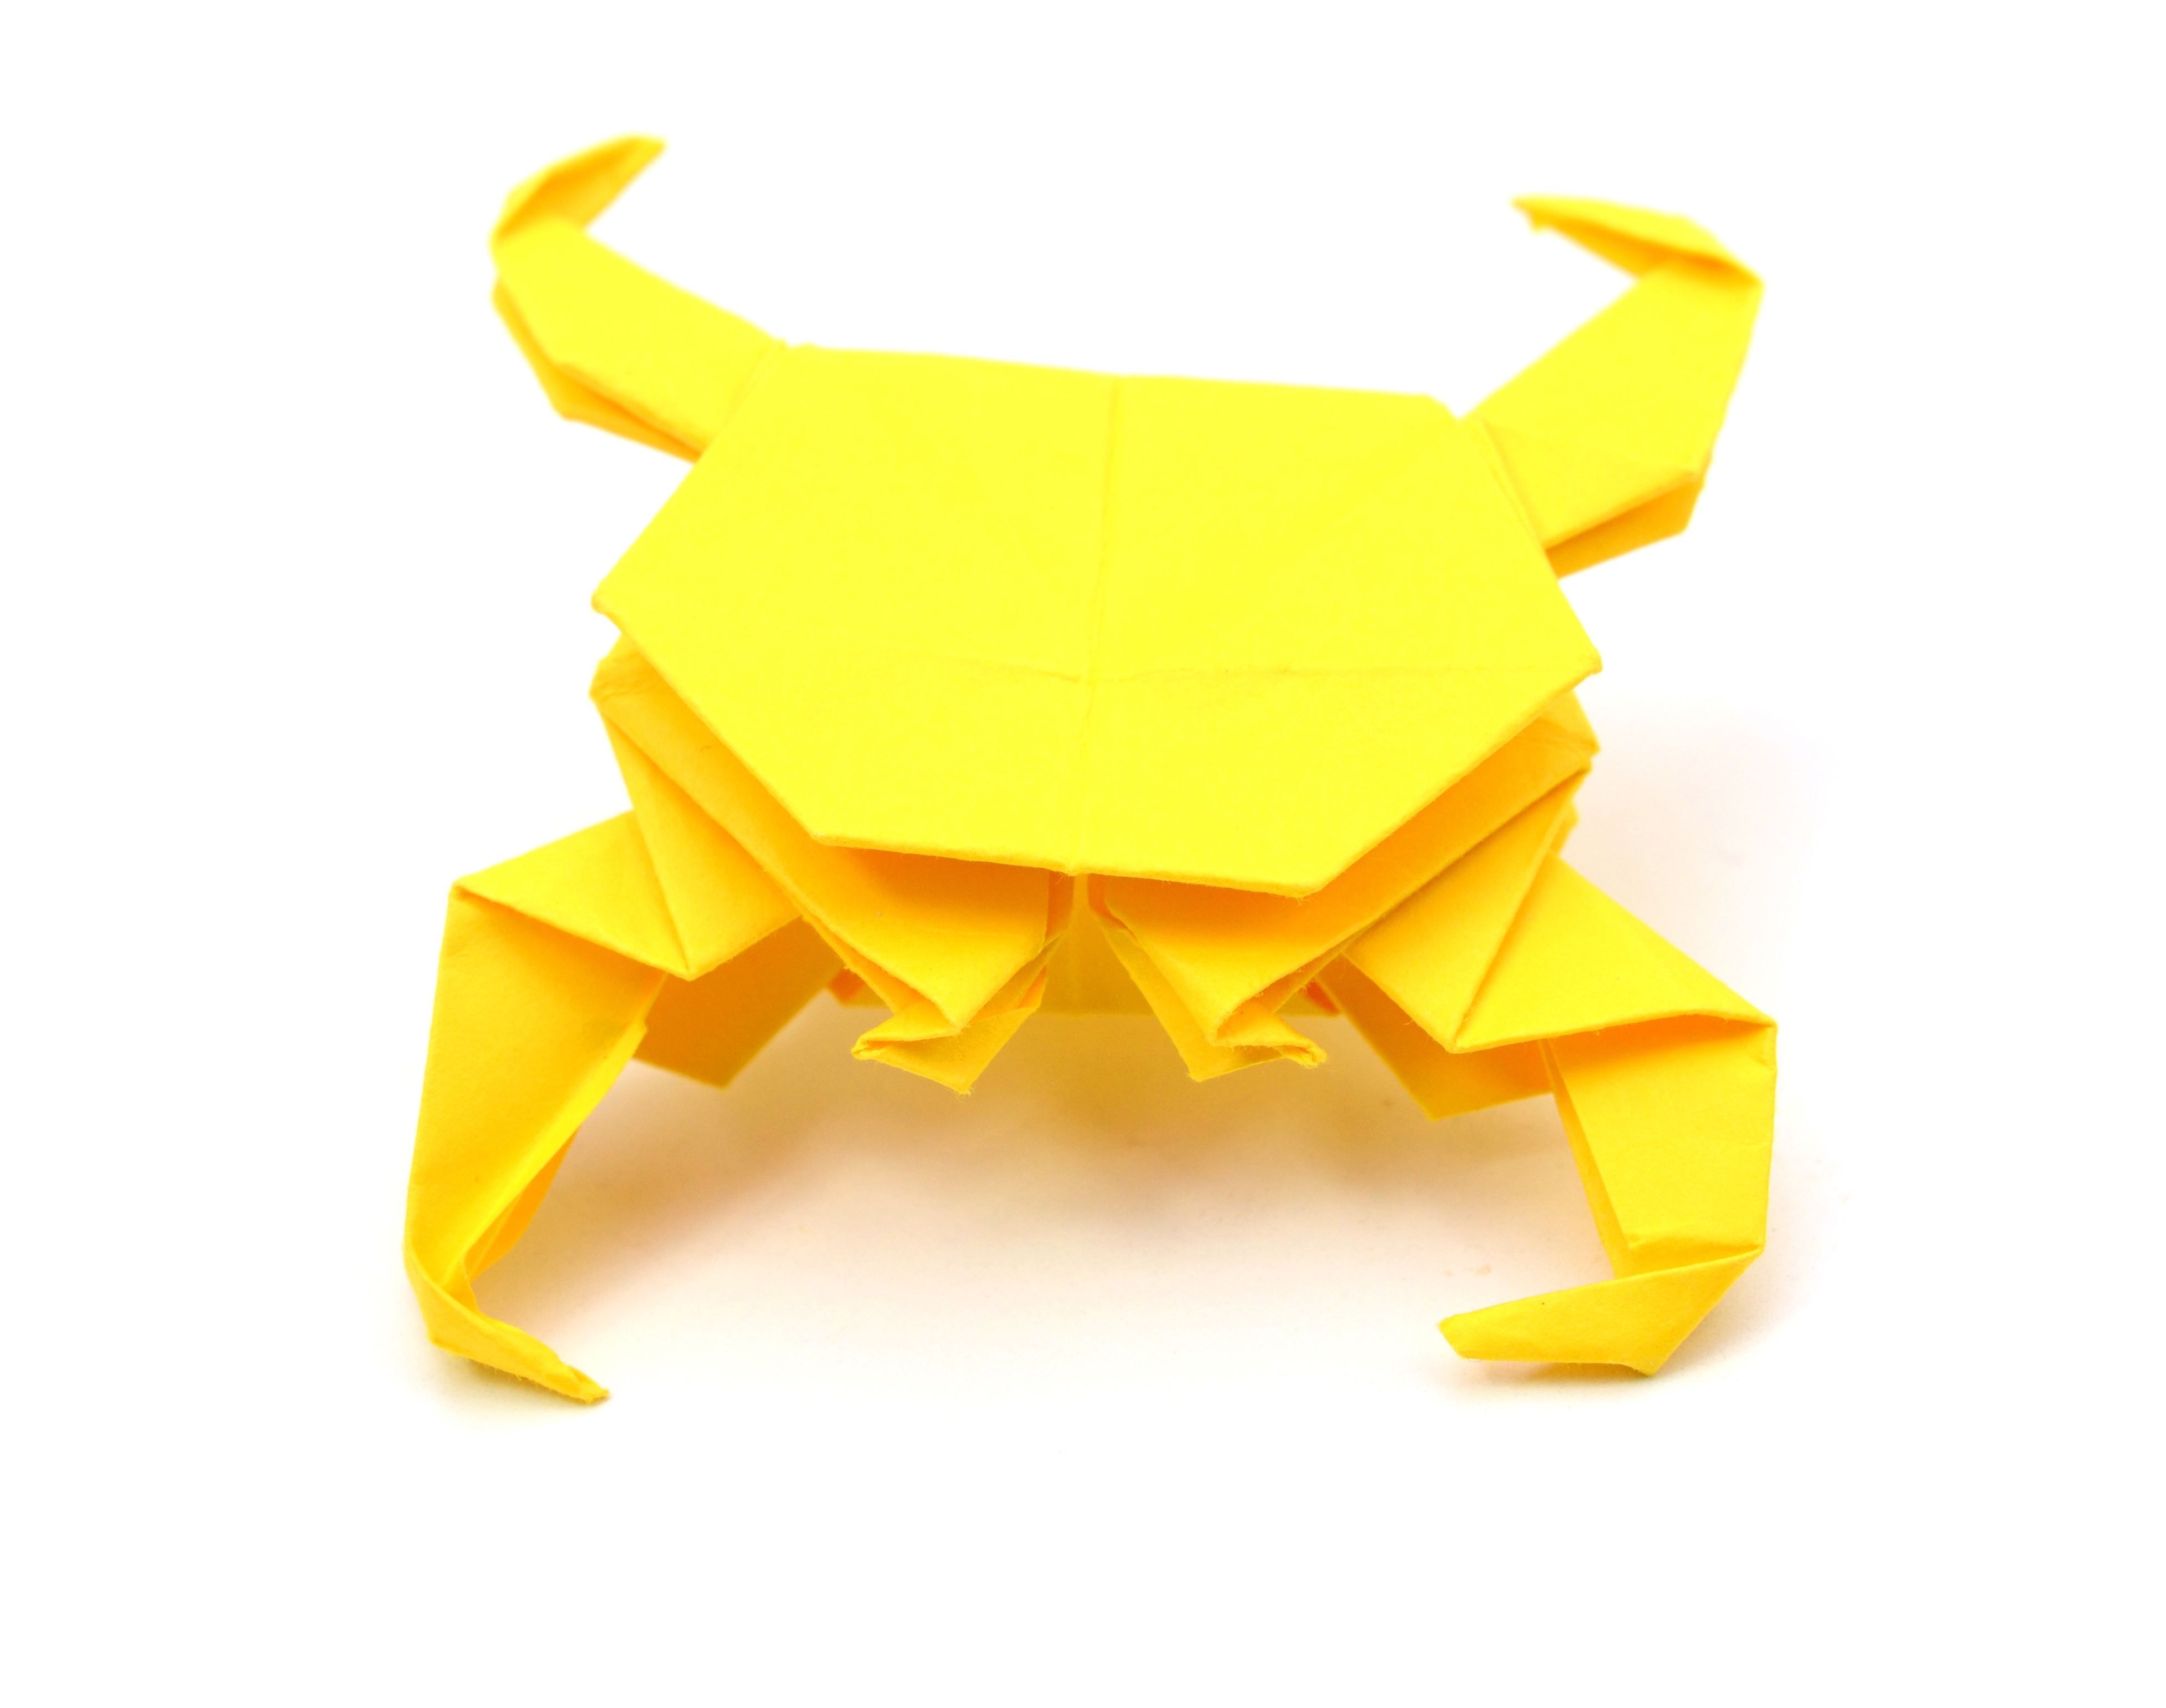 An origami paper crab. | Source: Getty Images